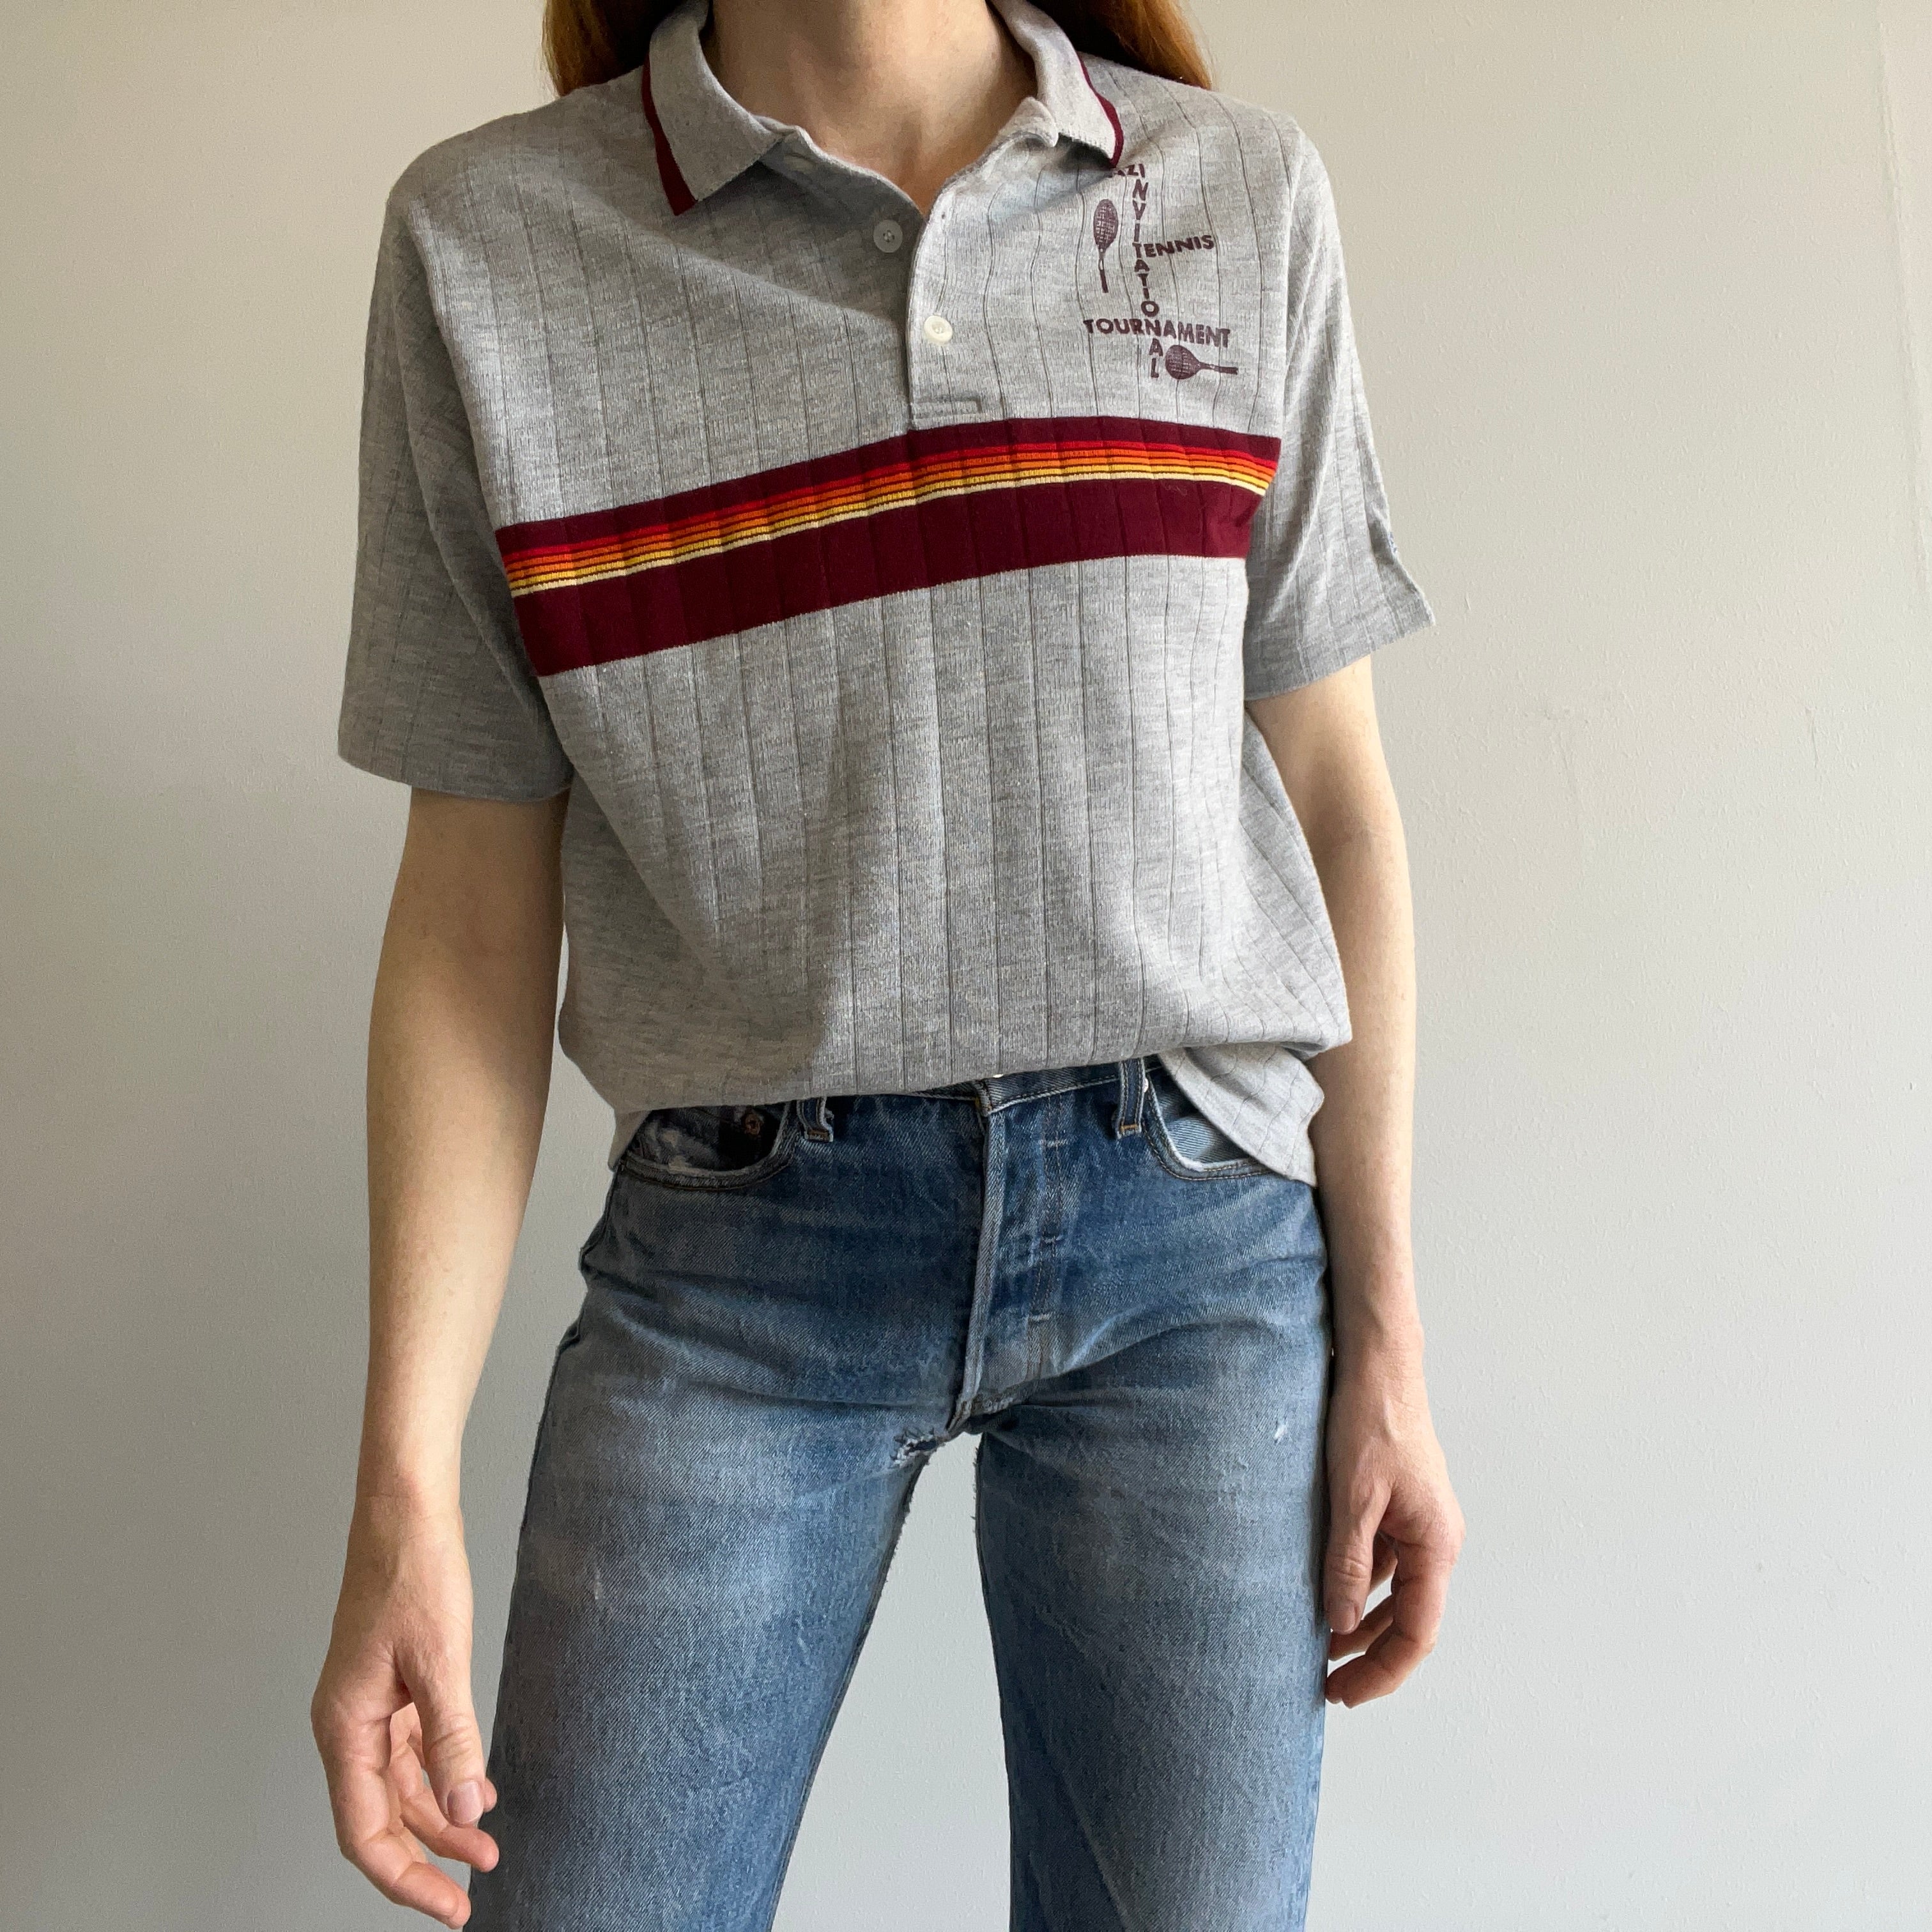 1980s Champion Brand Cotton Rolled Neck T-Shirt